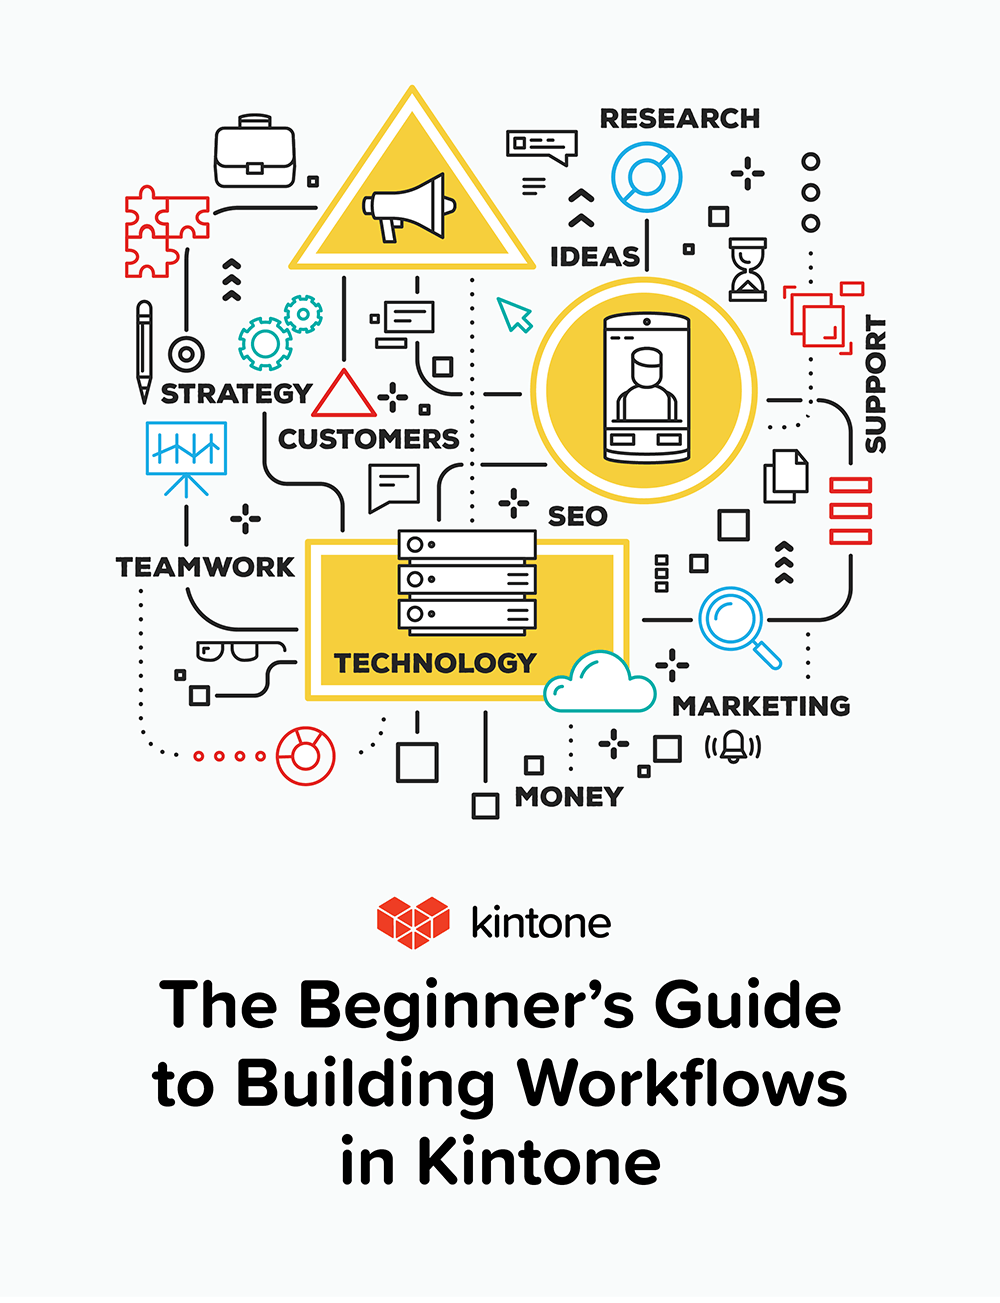 The Beginner's Guide to Building Workflows in Kintone